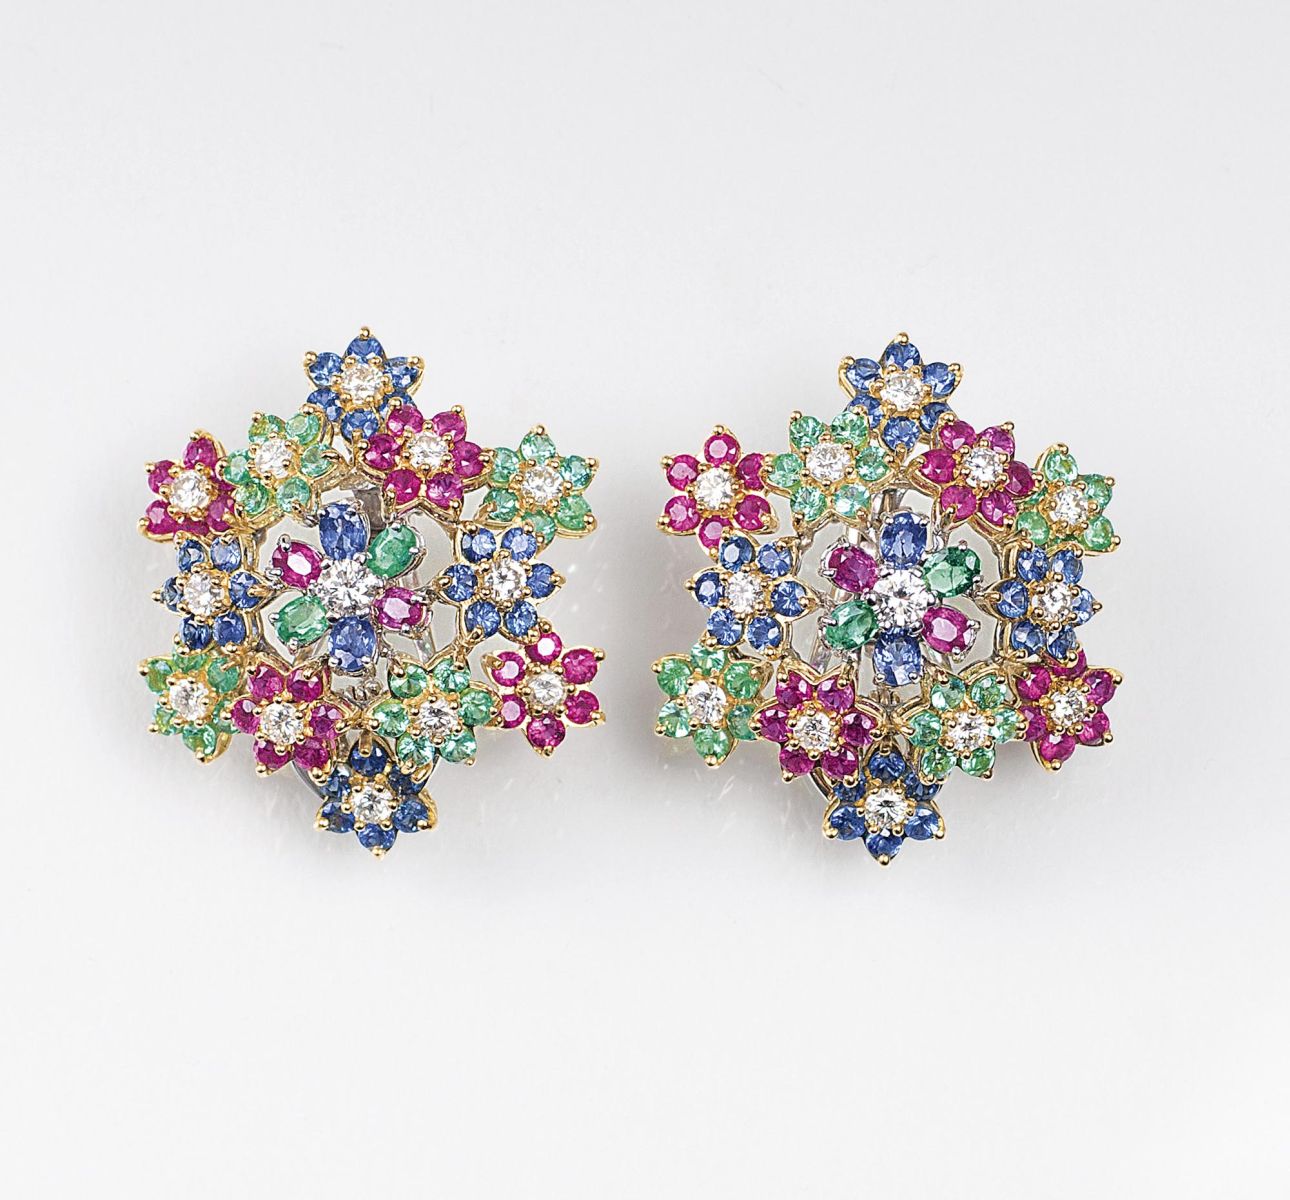 A Pair flower decorated Gemstone Earrings with Rubies, Sapphires, Emeralds and Diamonds